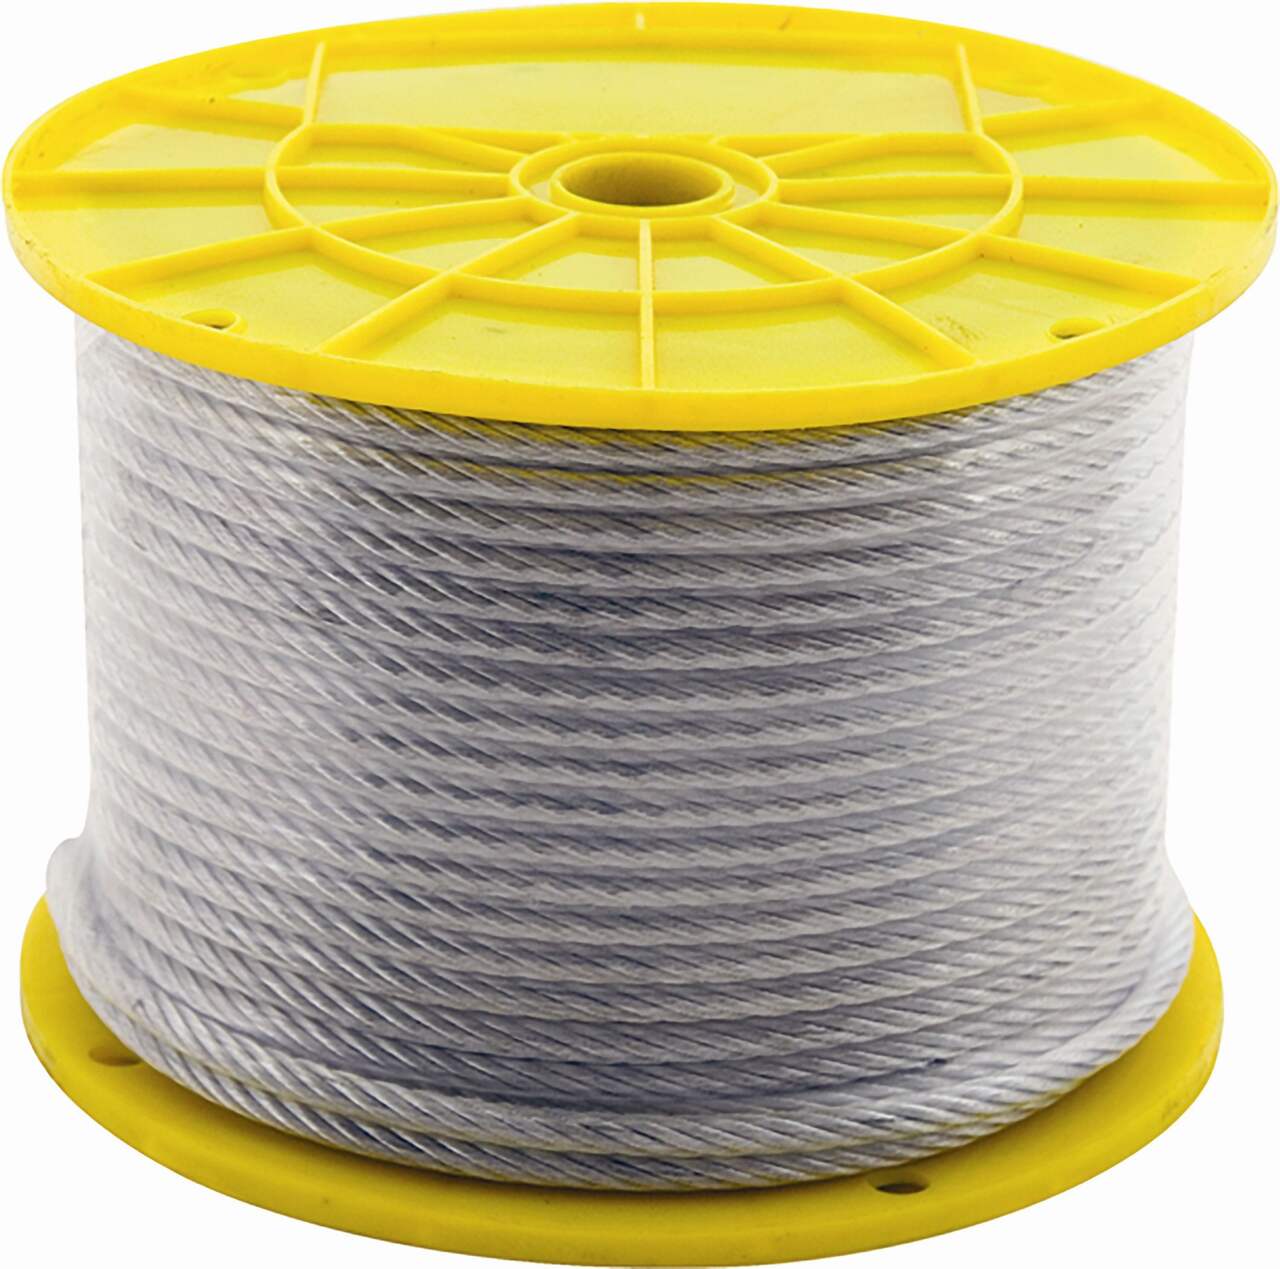 https://media-www.canadiantire.ca/product/fixing/hardware/general-hardware/0618105/reel-7x19-galvanized-steel-cable-1-8-x-500--ce6e6618-1052-4d61-97b0-0f669b53ac1a-jpgrendition.jpg?imdensity=1&imwidth=640&impolicy=mZoom